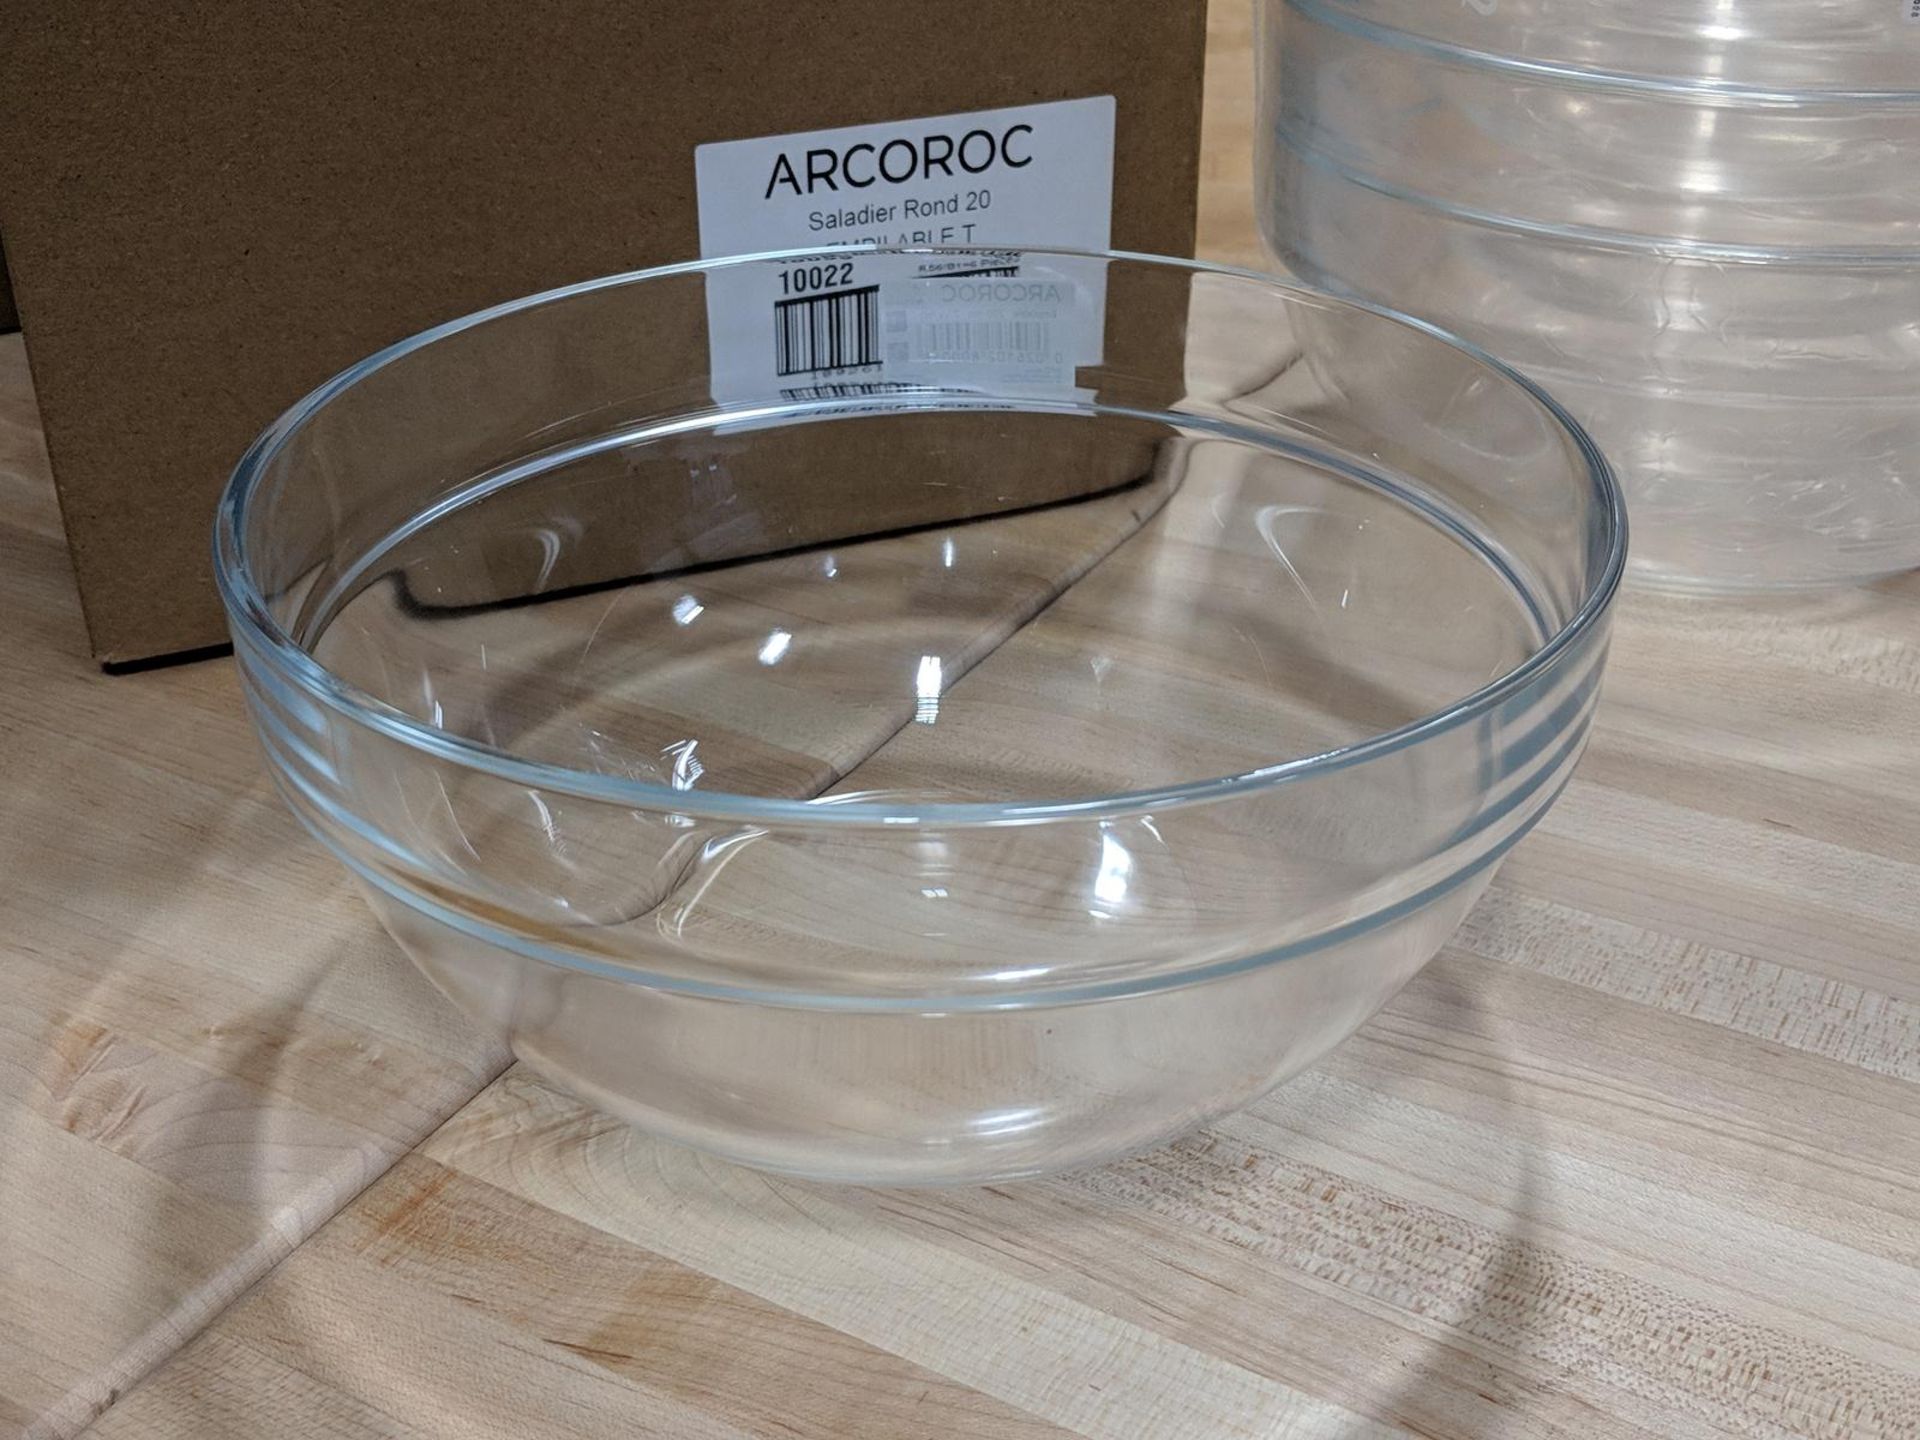 8" Clear Glass Stacking Salad Bowls, 64oz/1.9L - Lot of 12 (2 Cases), Arcoroc 10022 - Image 2 of 5